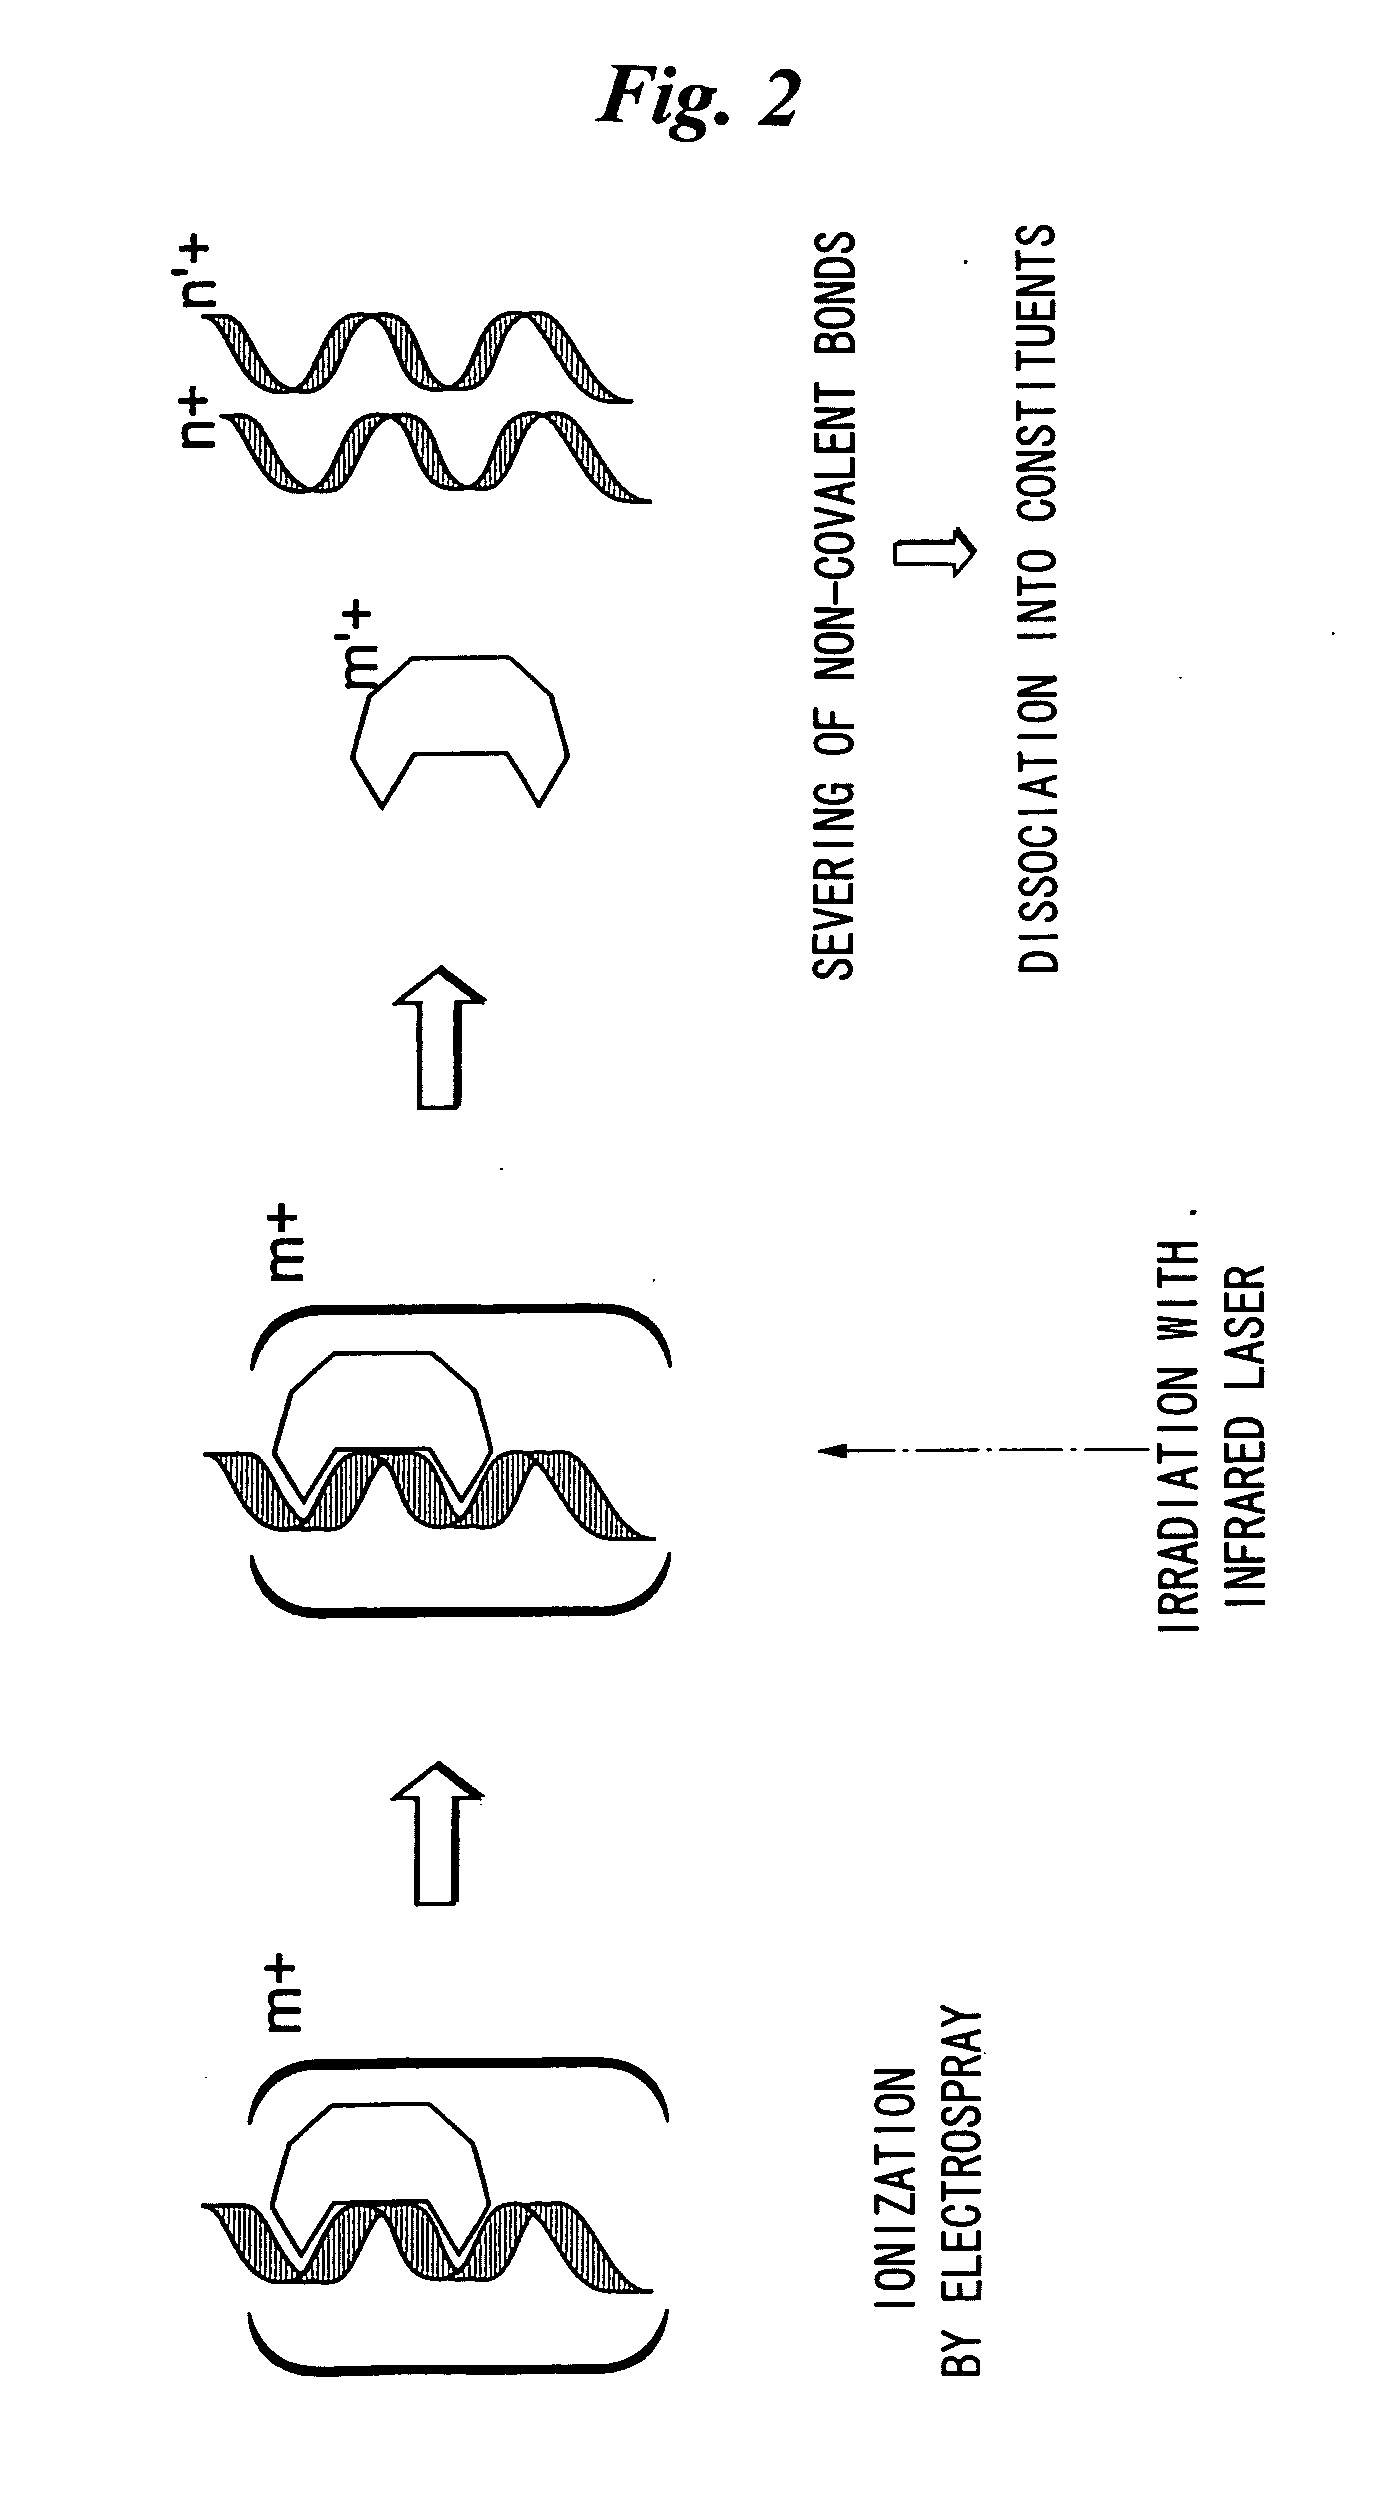 Method and apparatus for selectively severing and analyzing non-covalent and other bonds of biological macromolecules